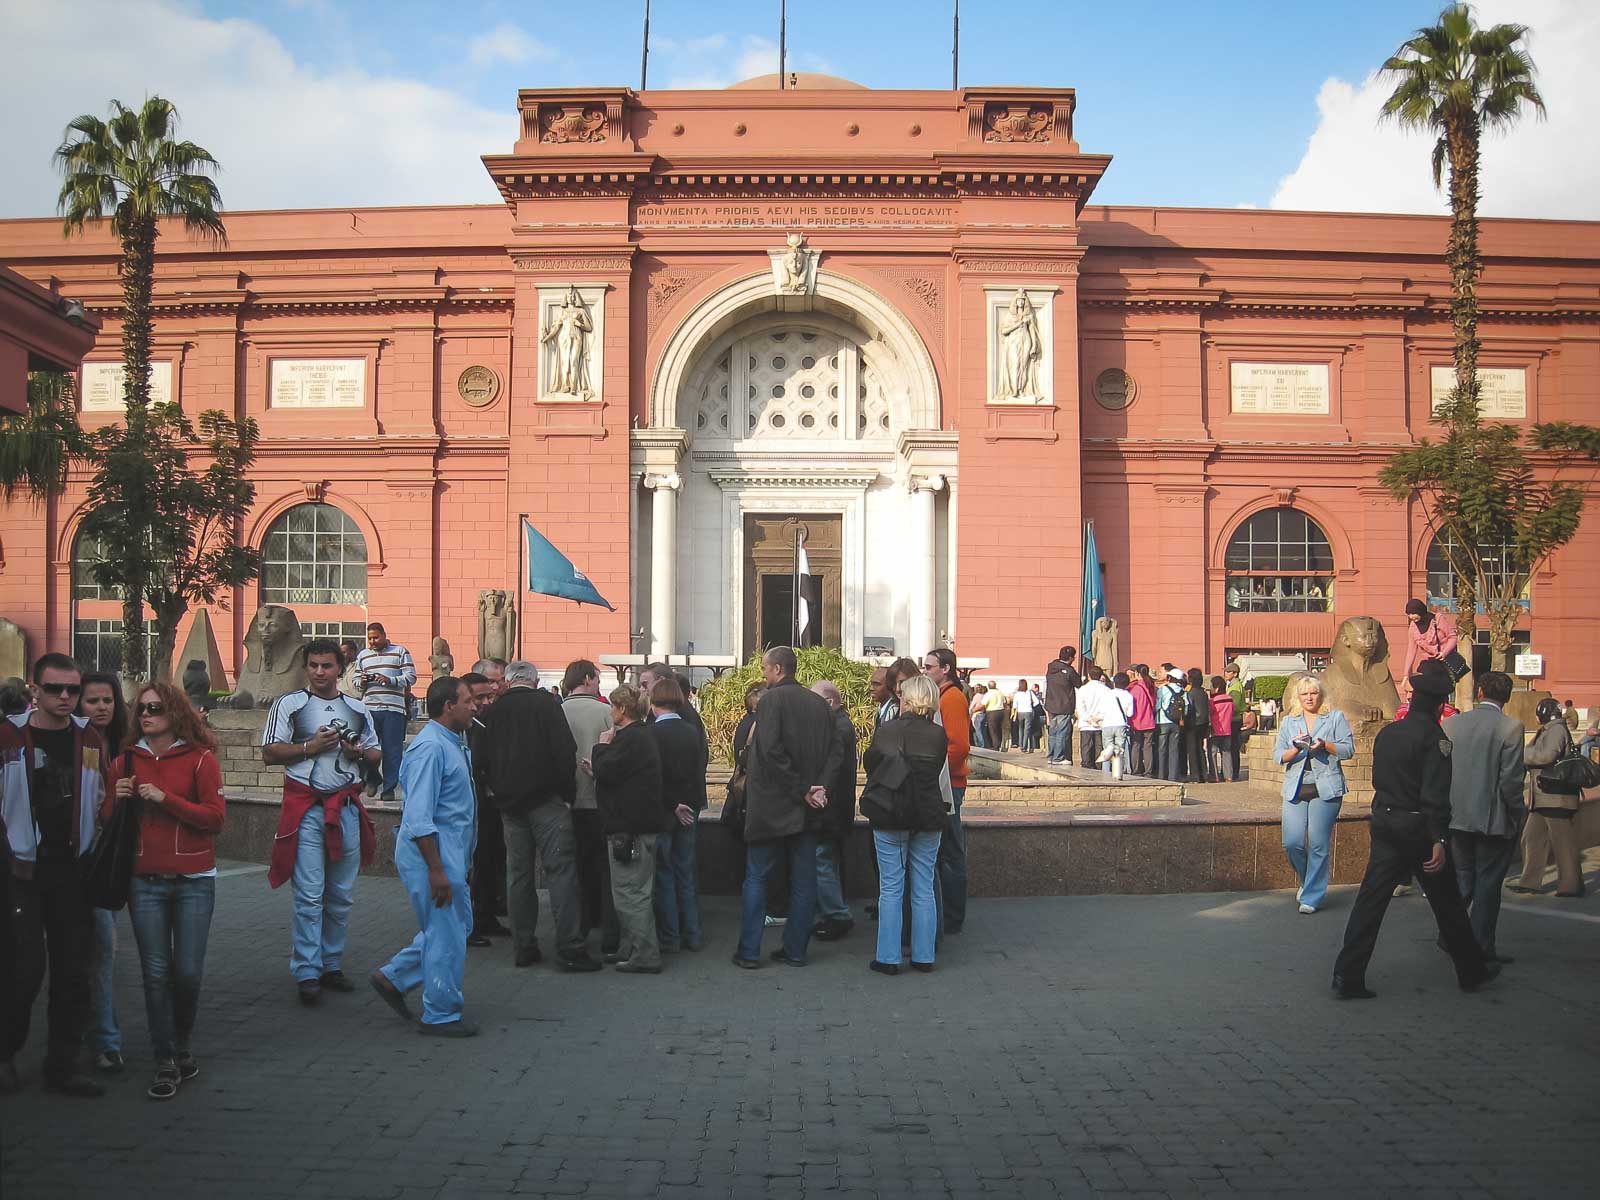 The Egyptian Museum in Cairo Egypt